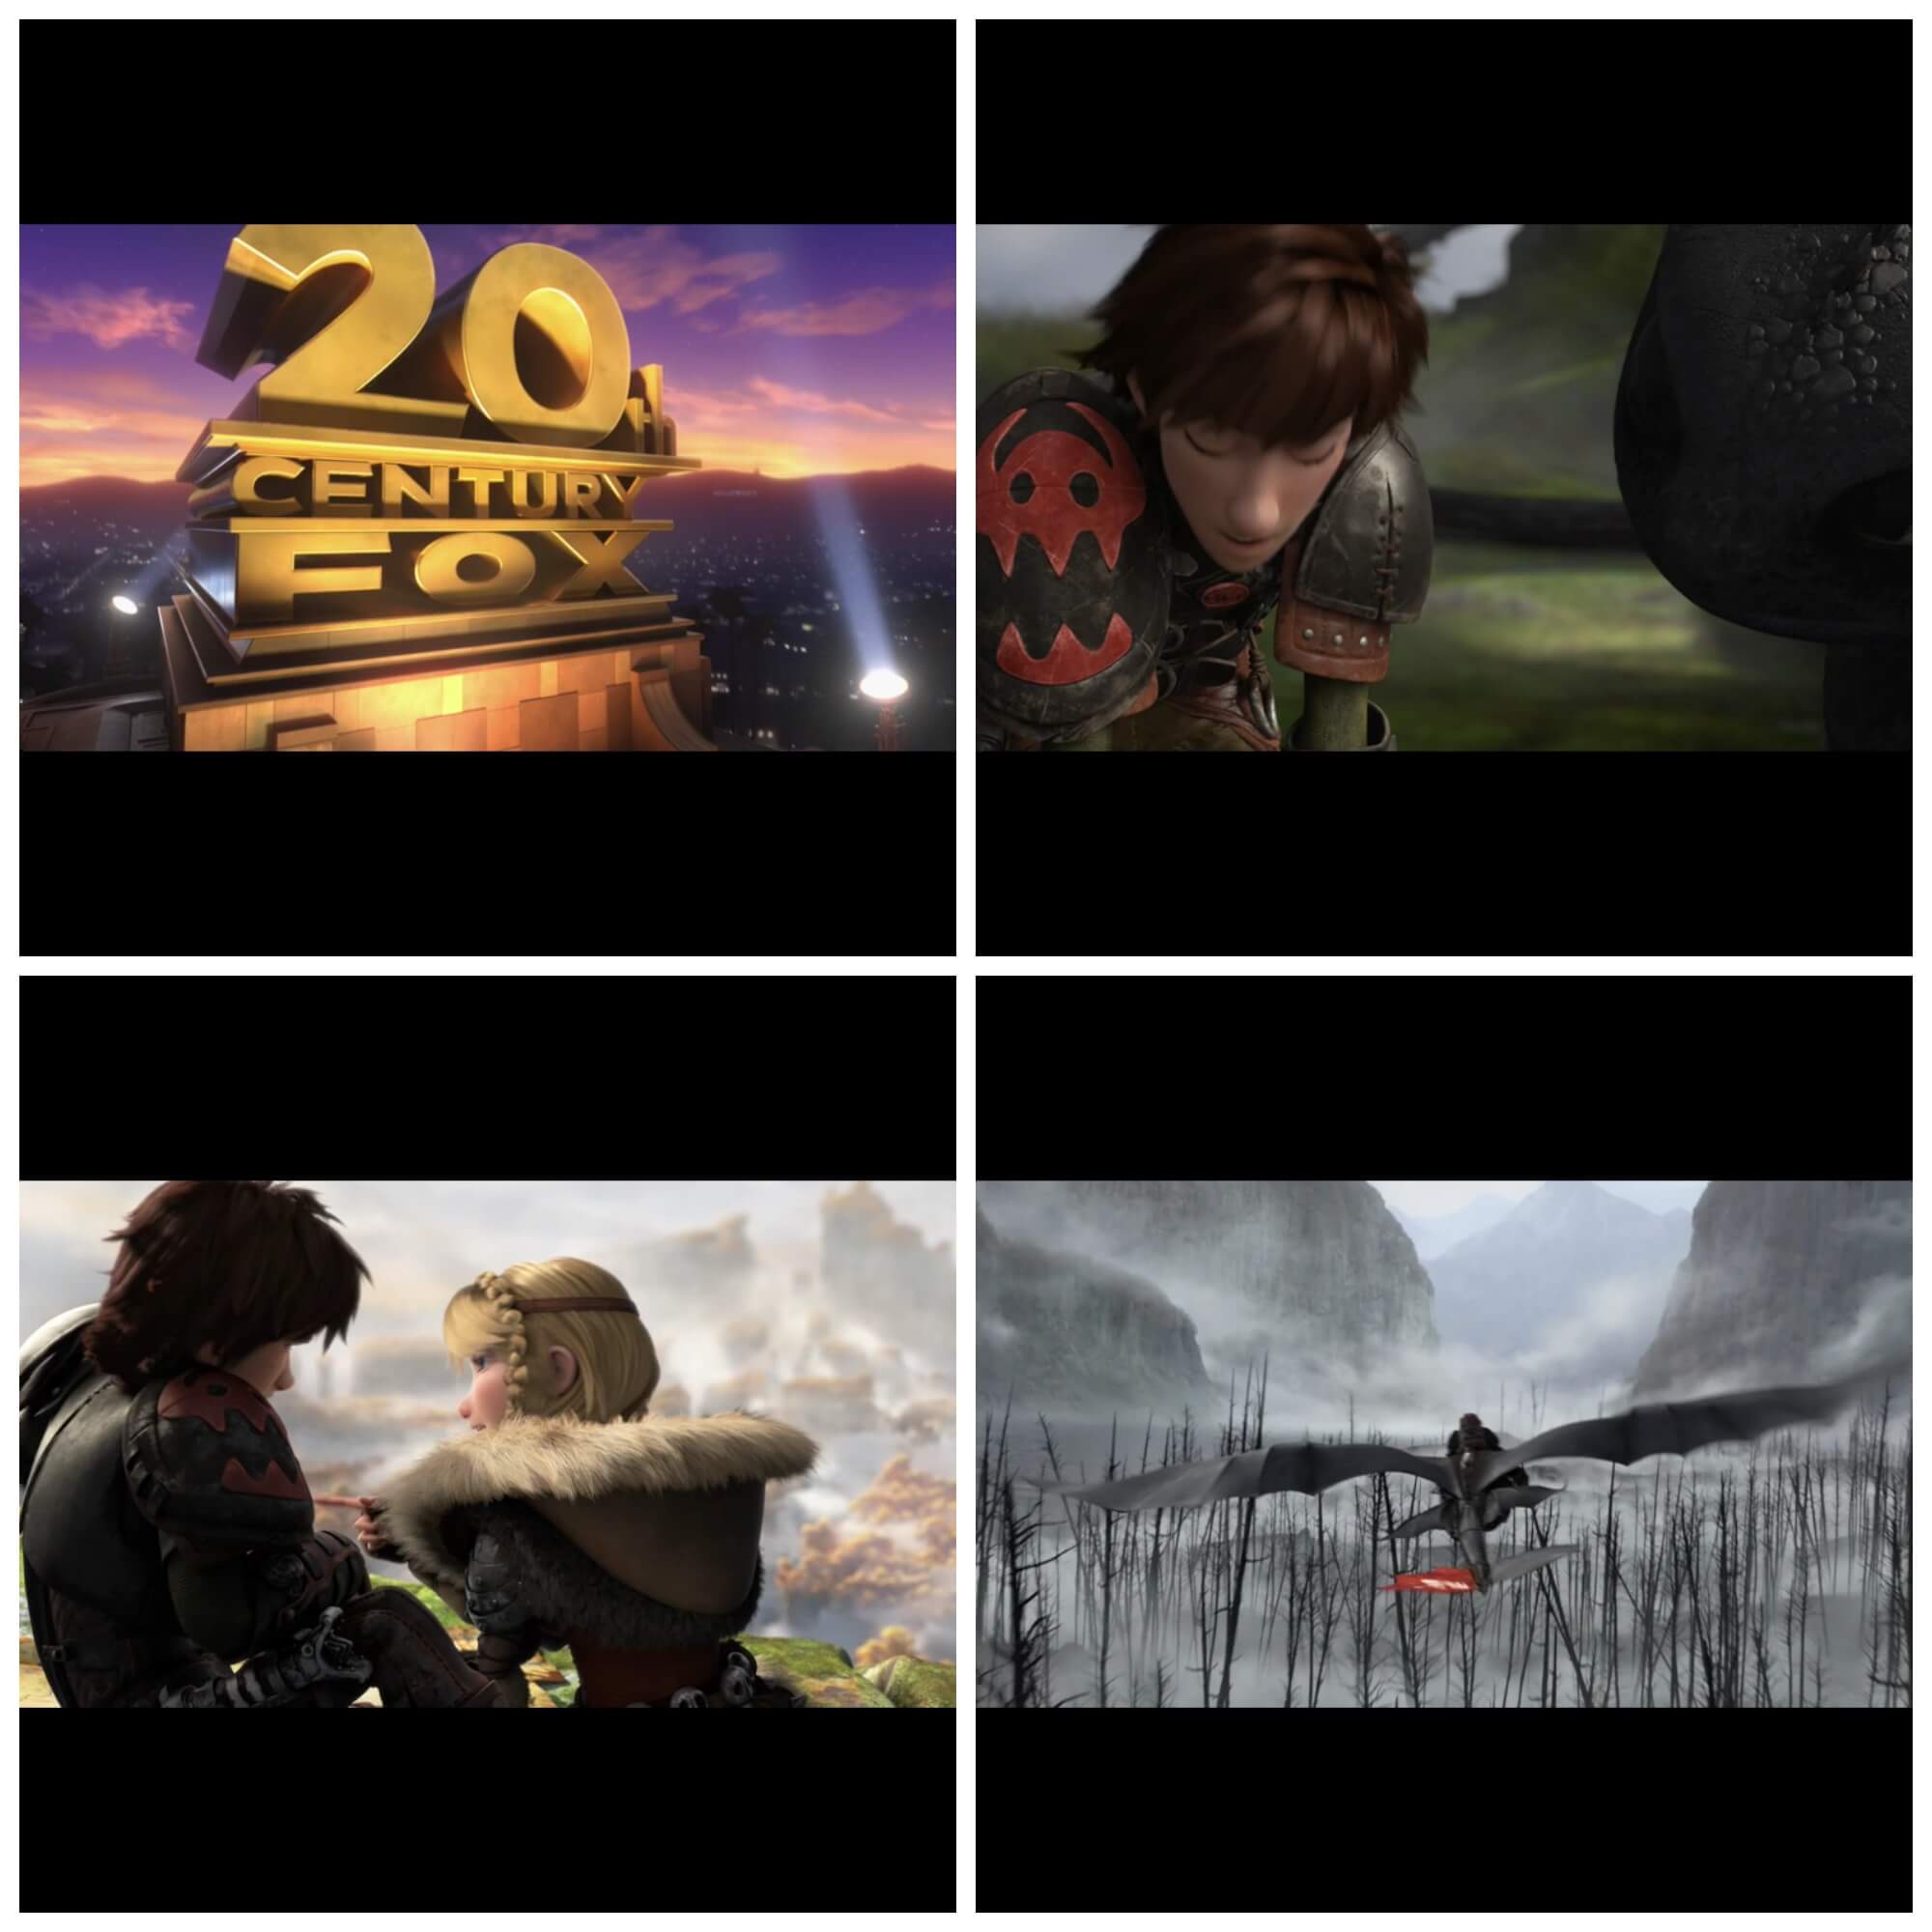 how to train your dragon 2